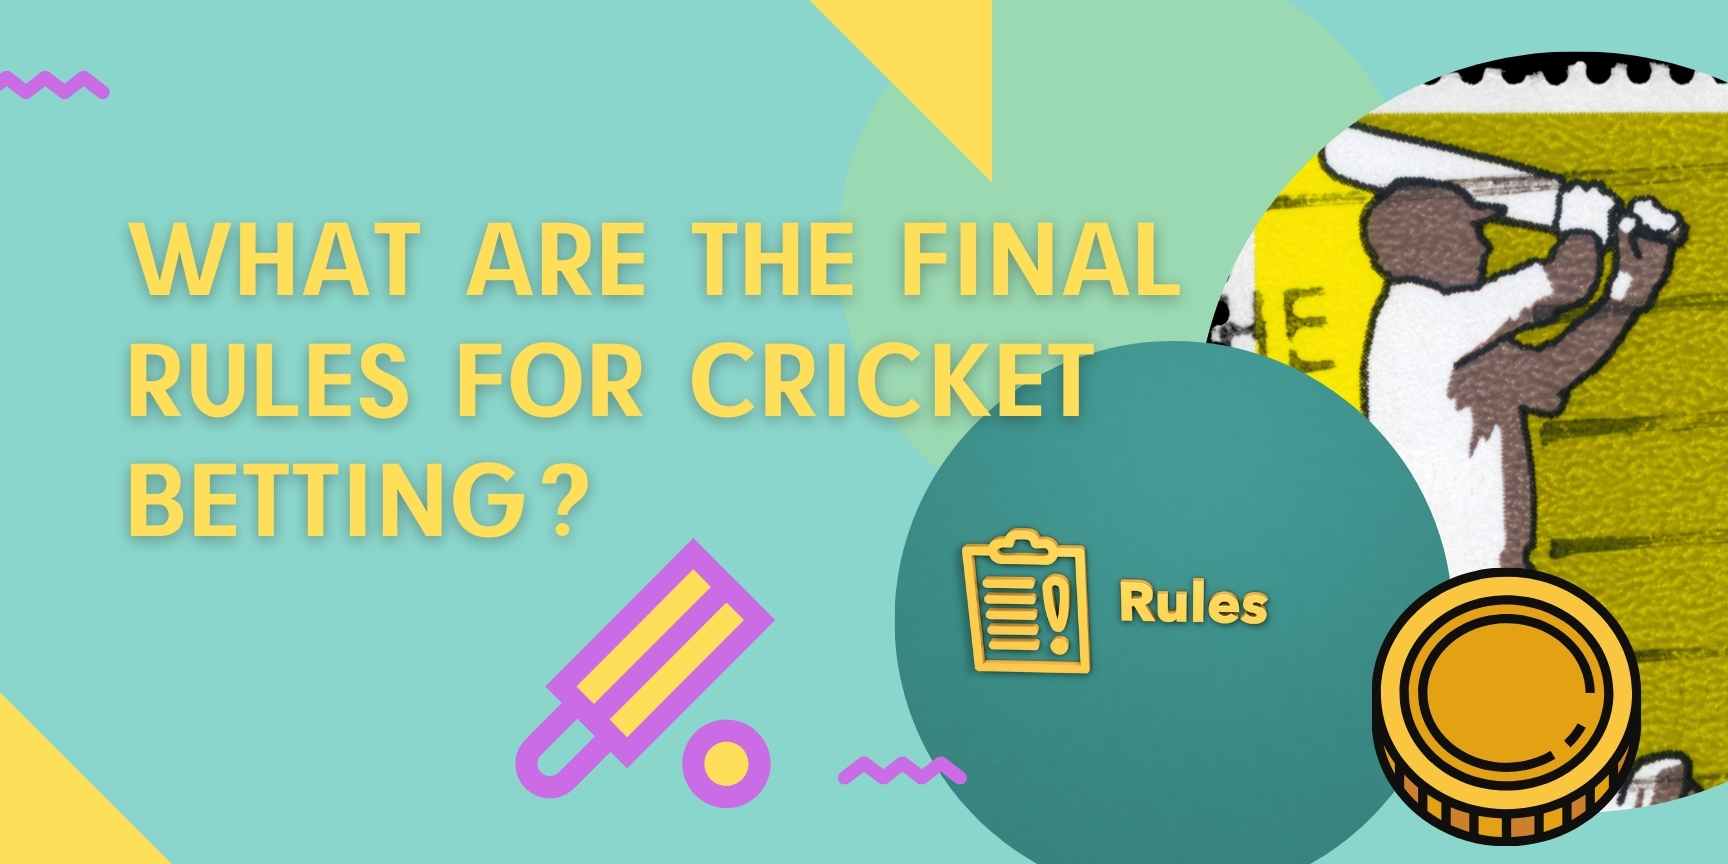 What are the final rules for cricket betting?